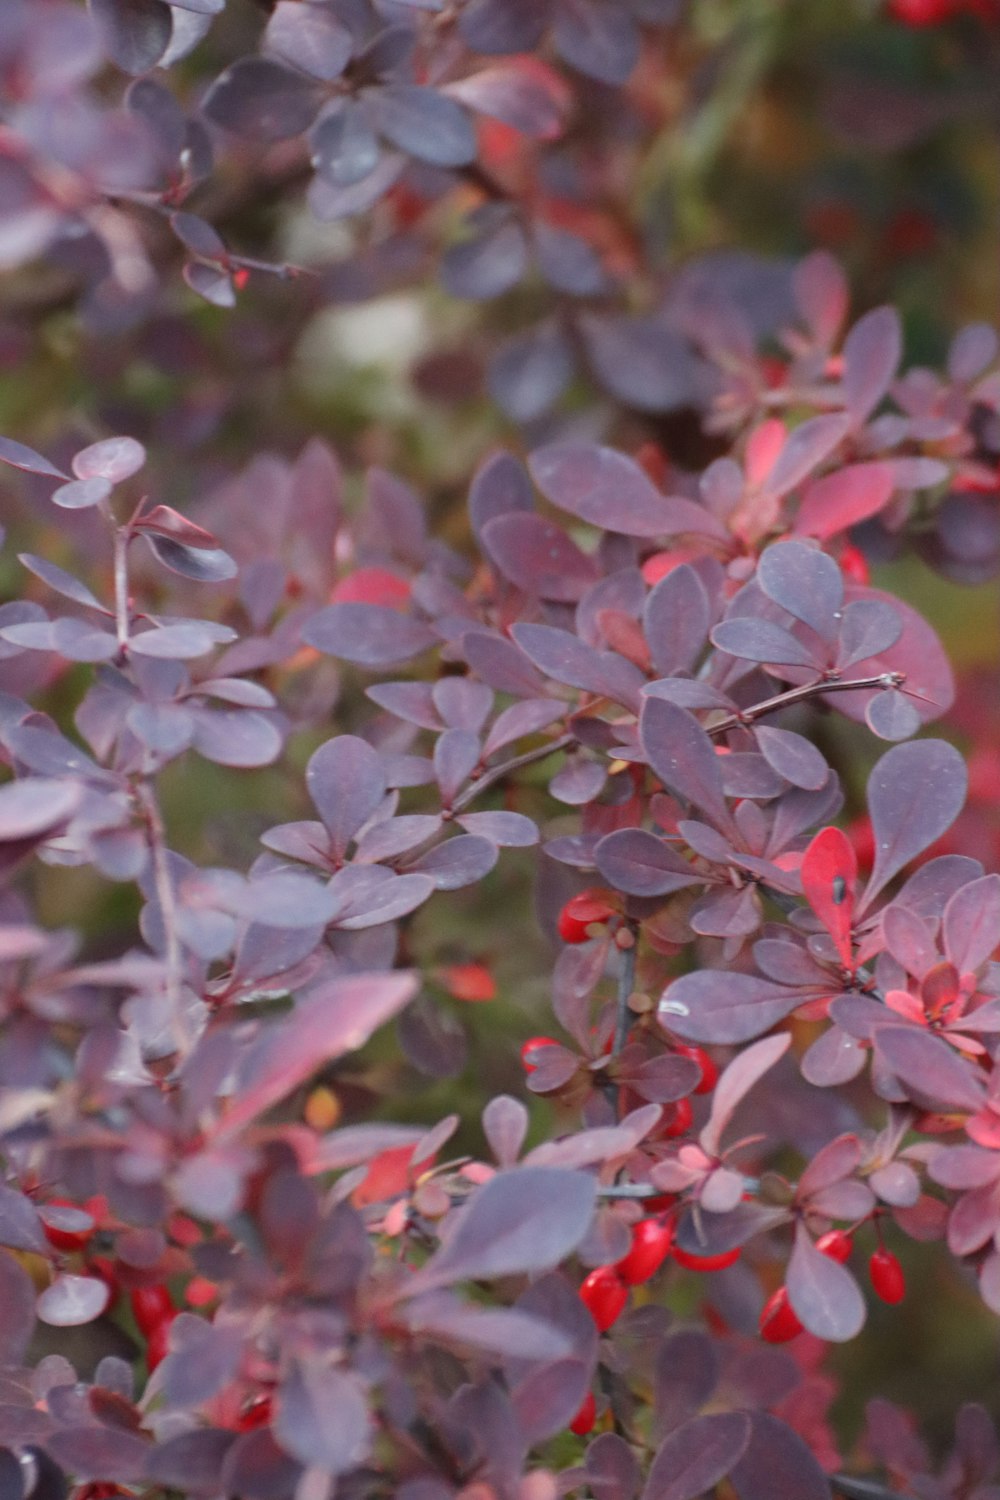 a close up of a bush with red berries on it